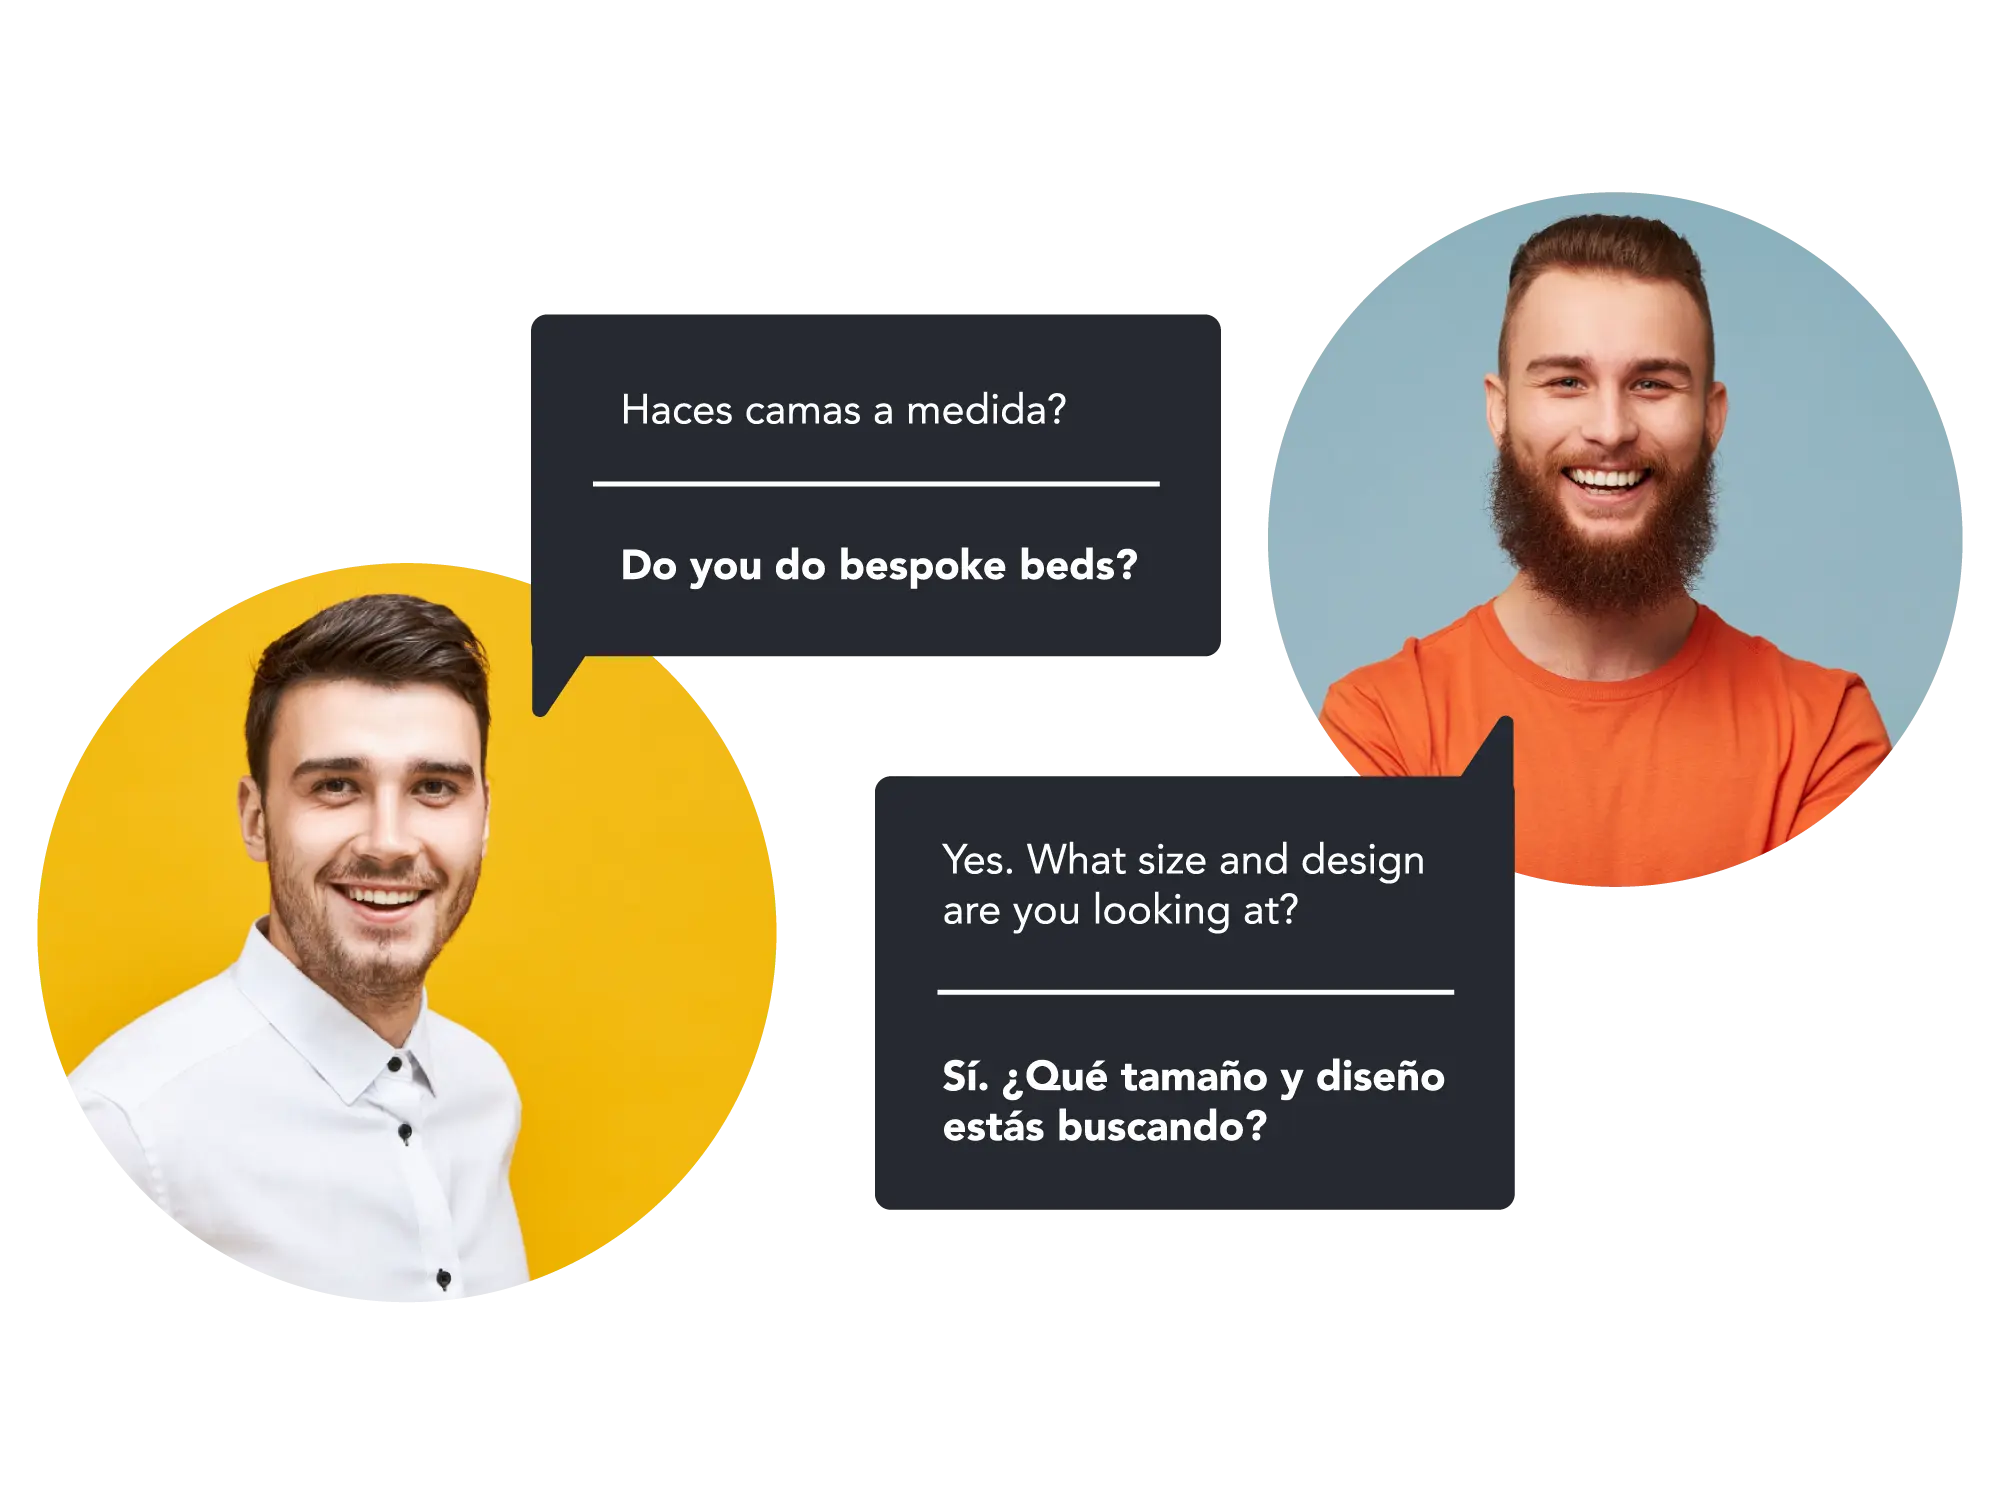 Customer Service - connecting customers to business by messaging